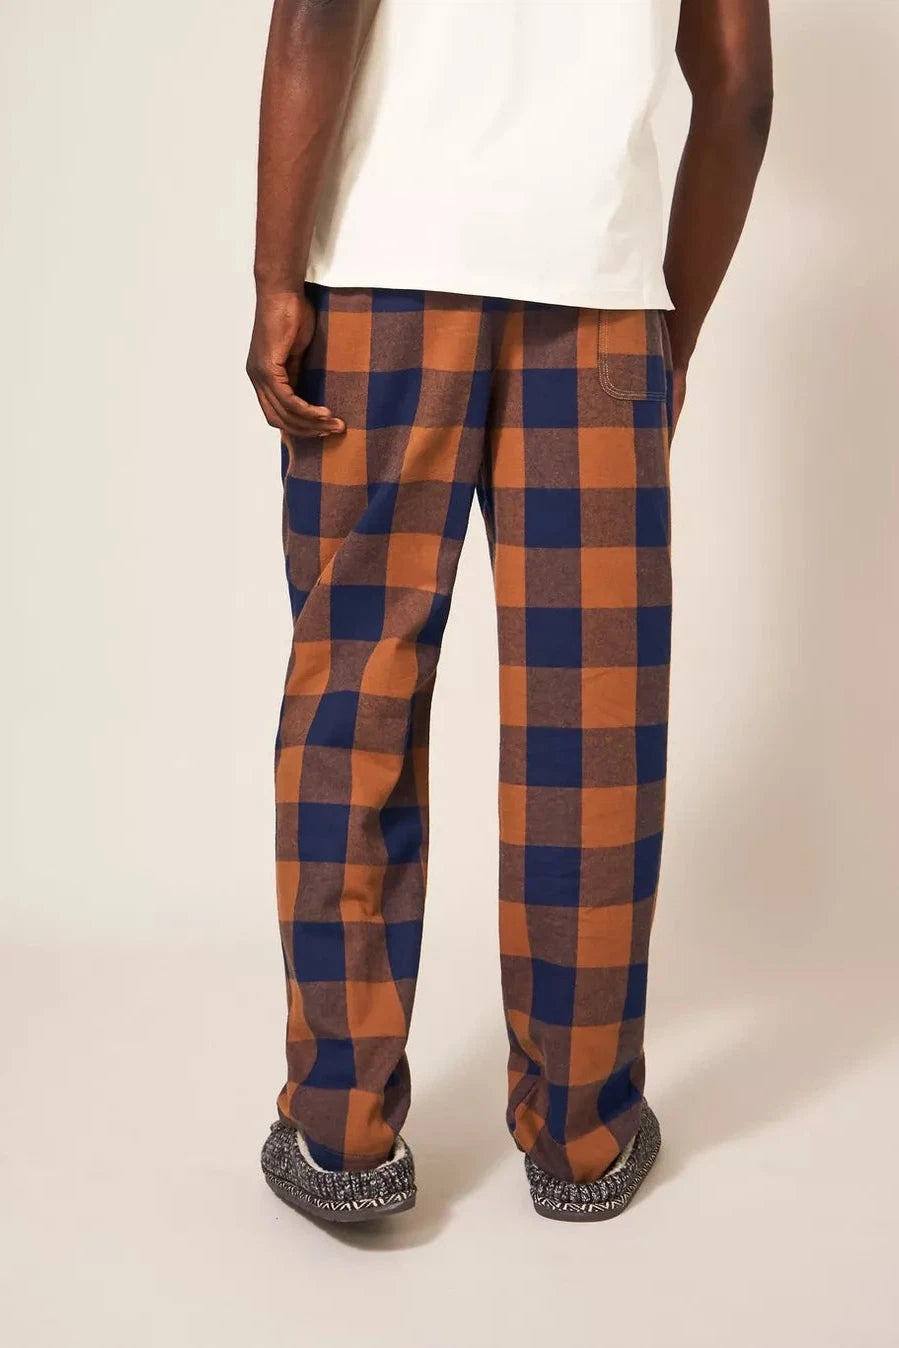 White Stuff Moorland Flannel PJ Trouser-Mens-Ohh! By Gum - Shop Sustainable